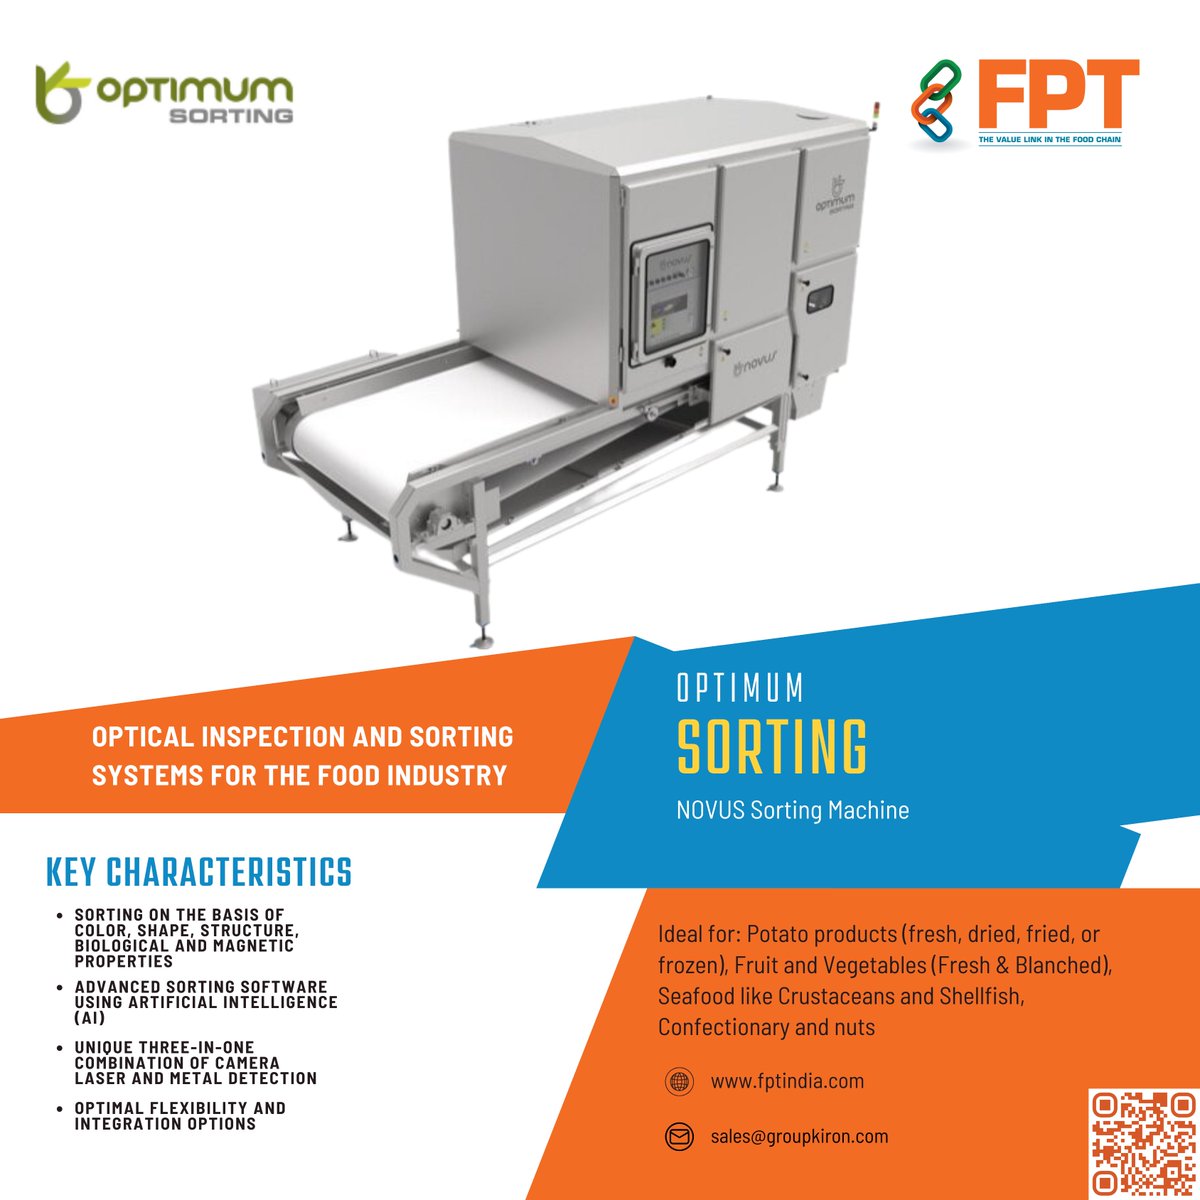 Kiron Food Processing Technologies is one of the leading manufacturers and distributors of Food Processing Equipment, we take your Product from concept to commissioning in a smooth and progressive path.
 
Delve deeper into our expertise on our blog: fptindia.com/blog/sorting-m…